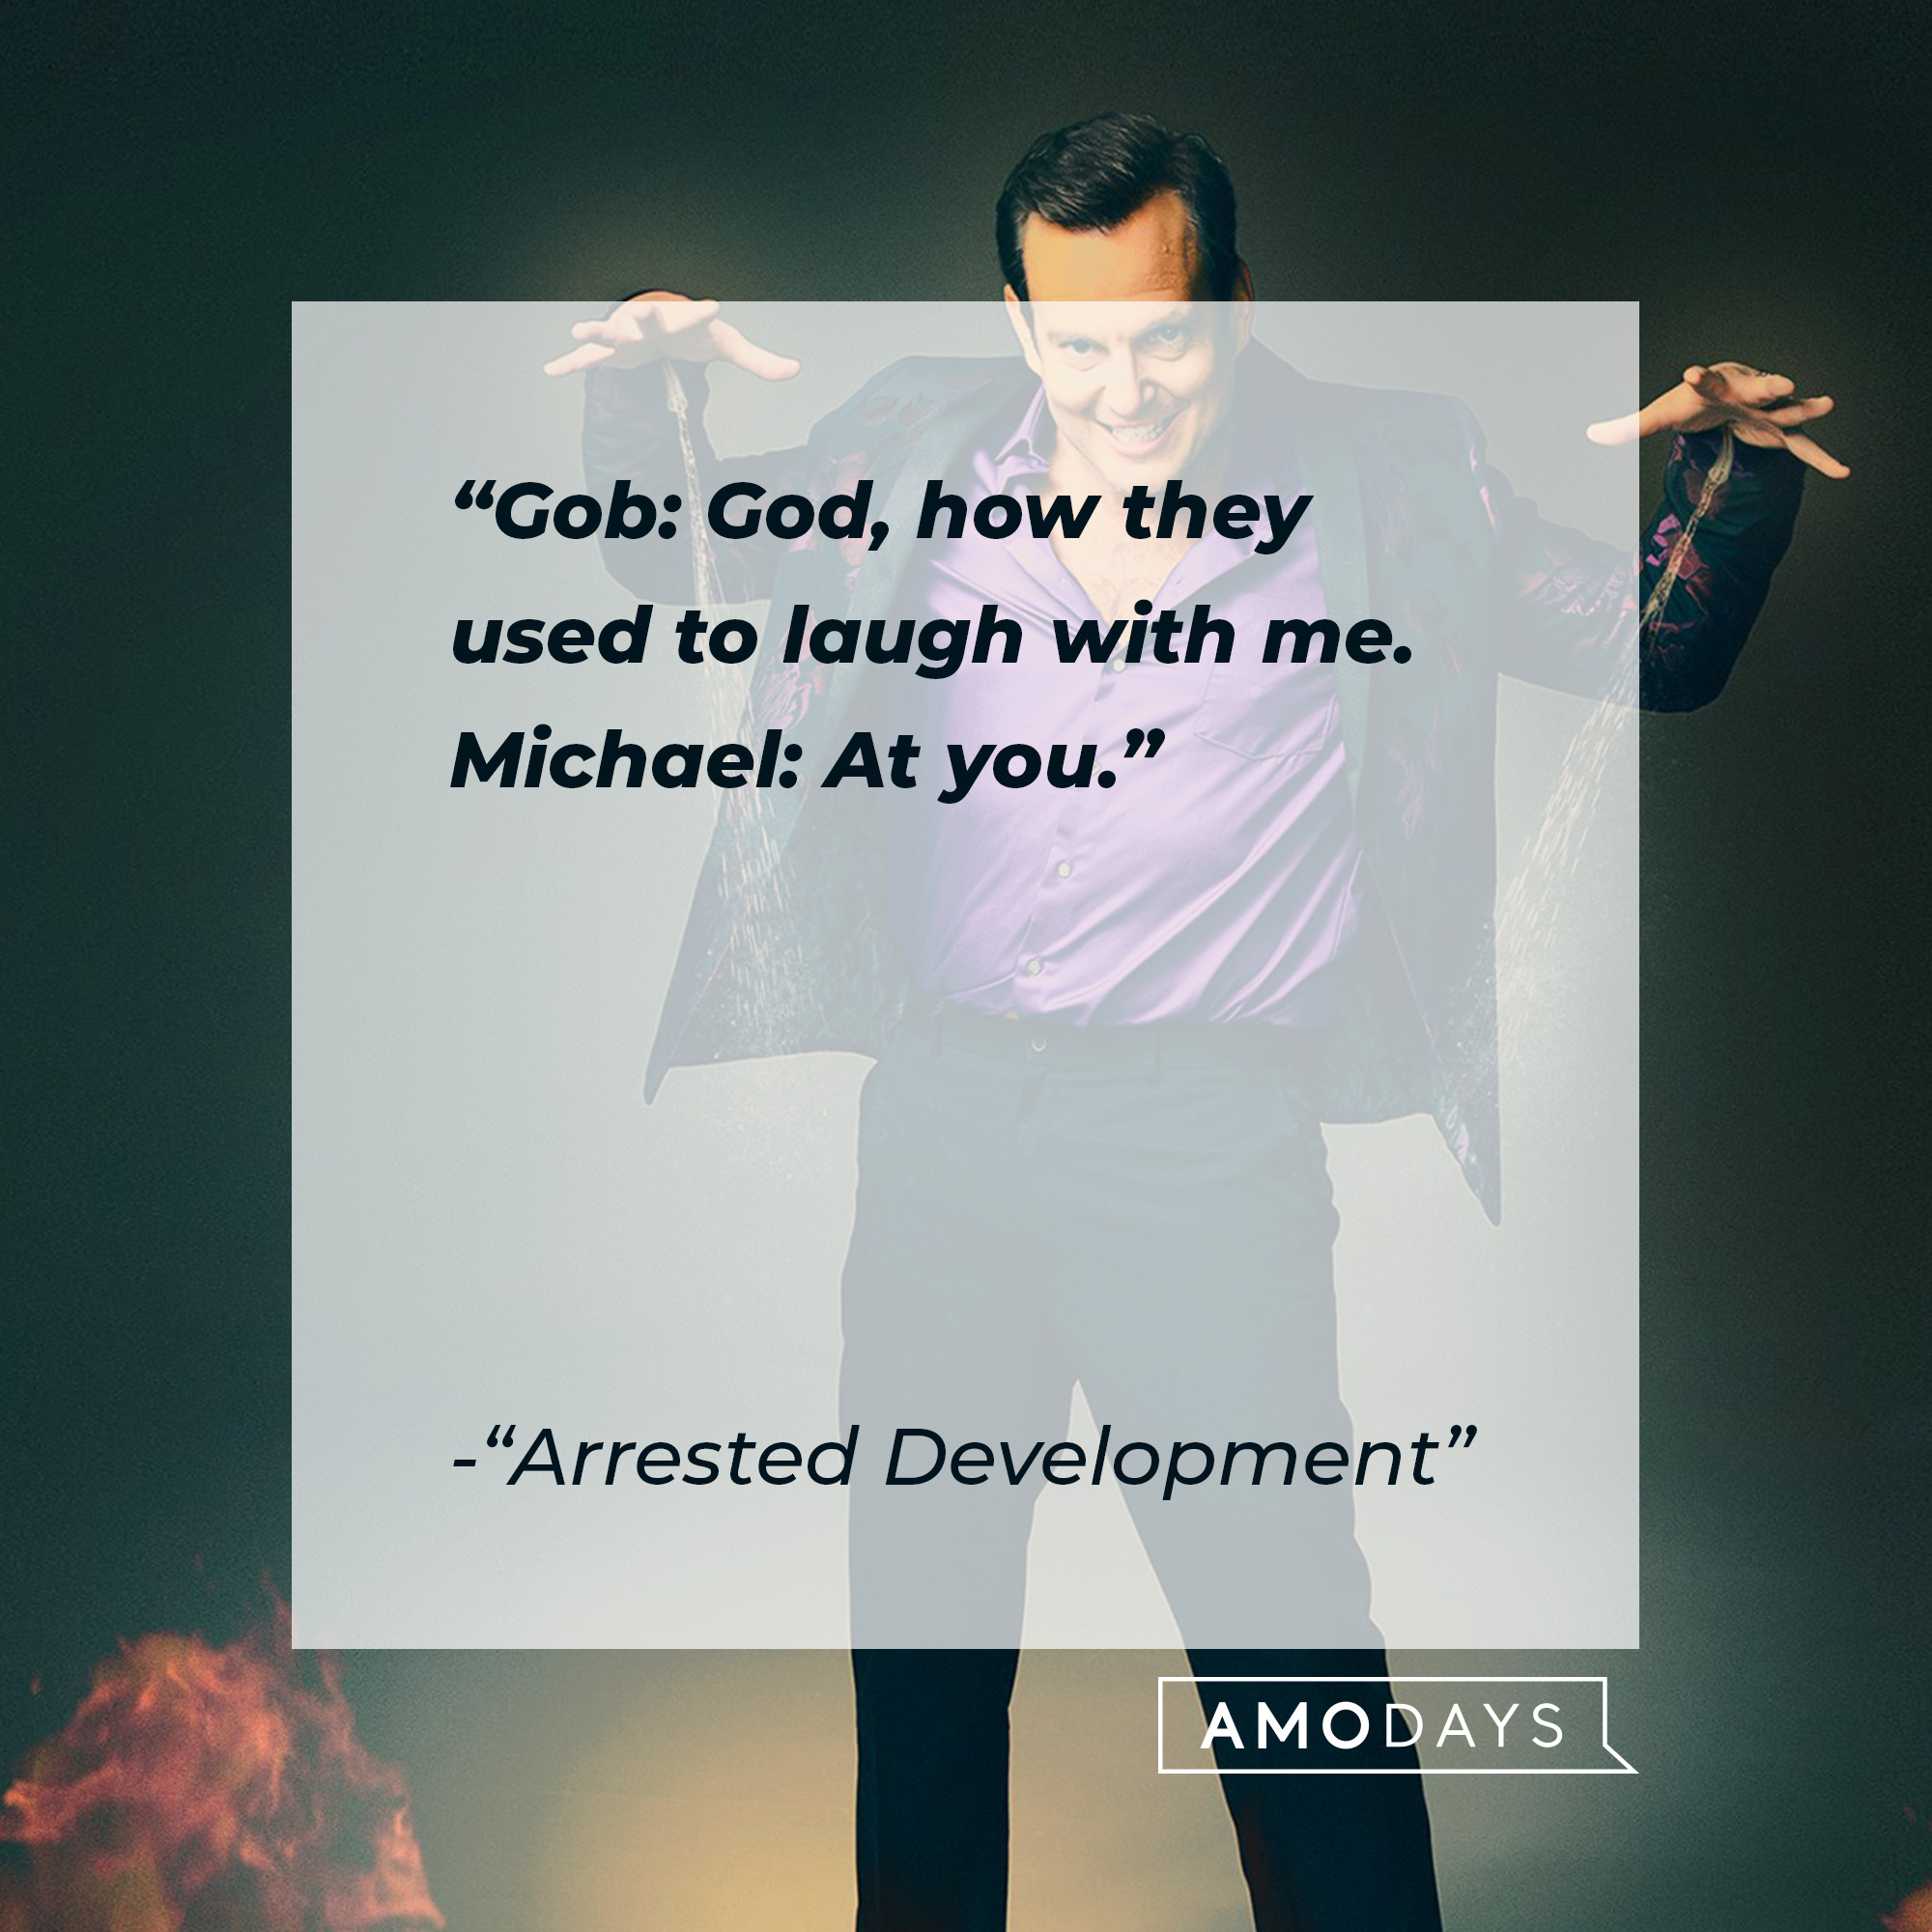 Quote from "Arrested Development:" "Gob: God, how they used to laugh with me. Michael: At you." | Source: facebook.com/ArrestedDevelopment